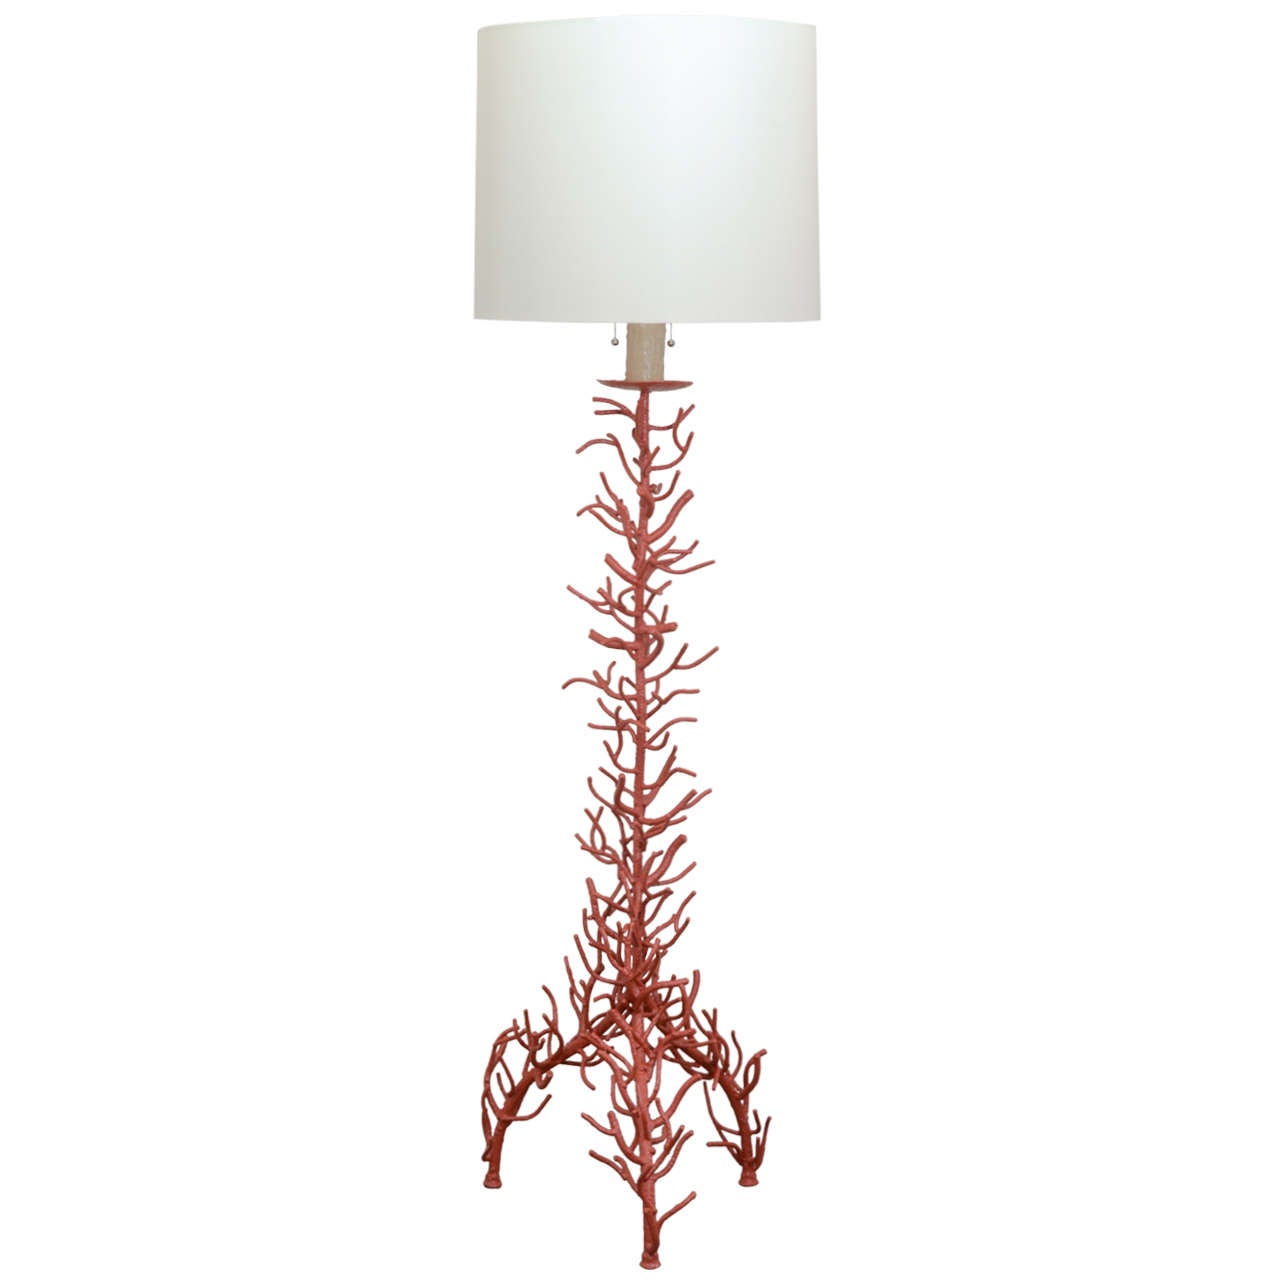 Beautiful coral style floor lamp